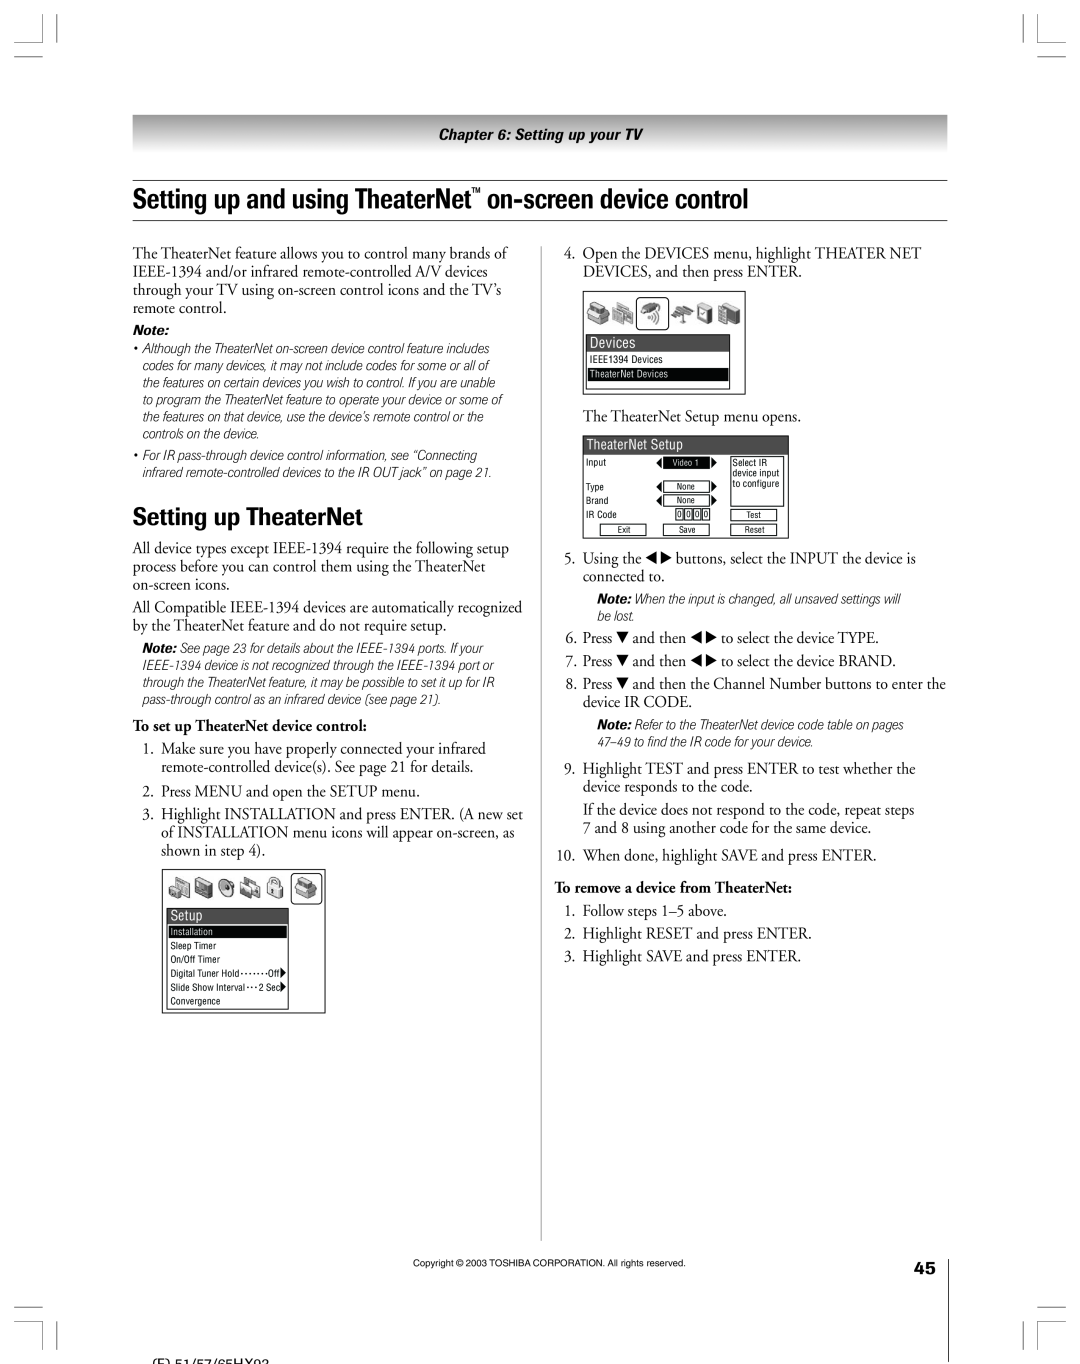 Toshiba 51HX93 owner manual Setting up and using TheaterNet on-screen device control, Setting up TheaterNet 